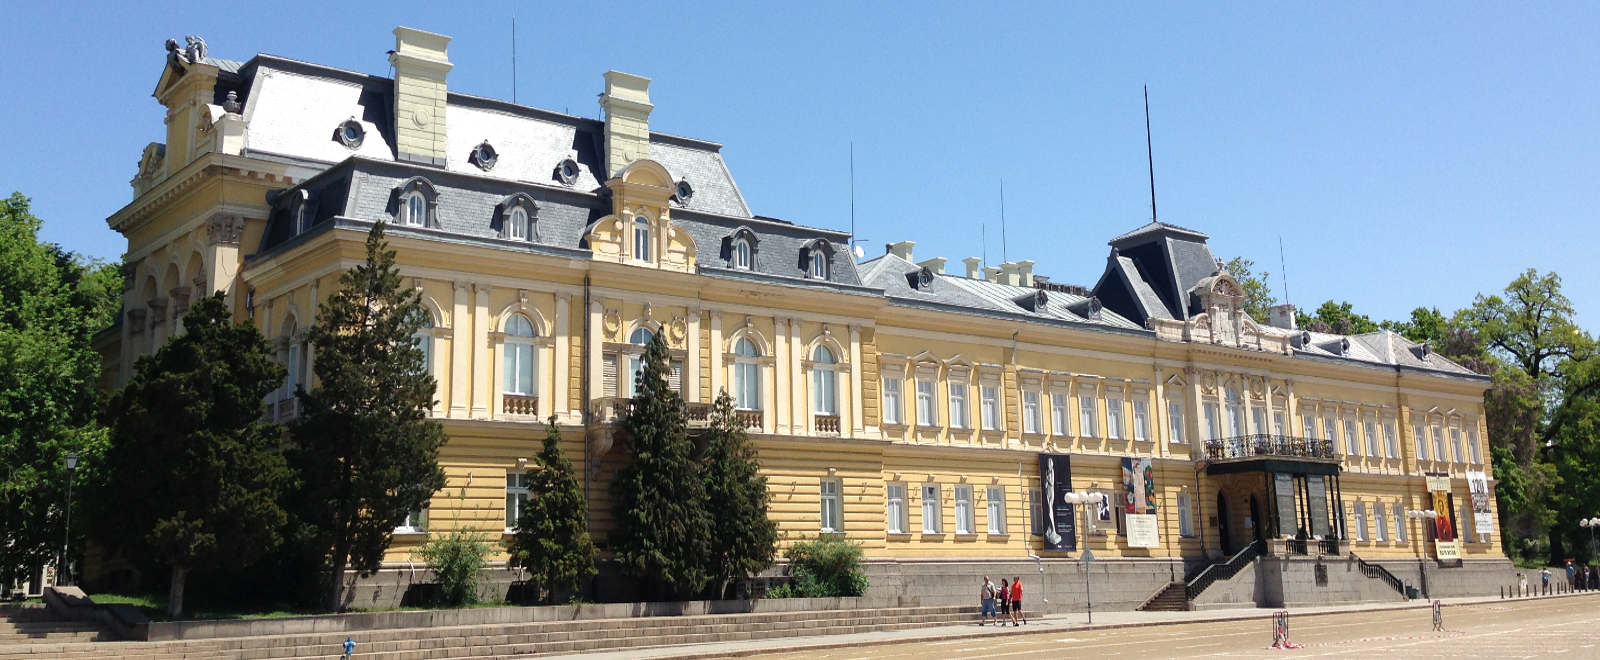 Former King's palace